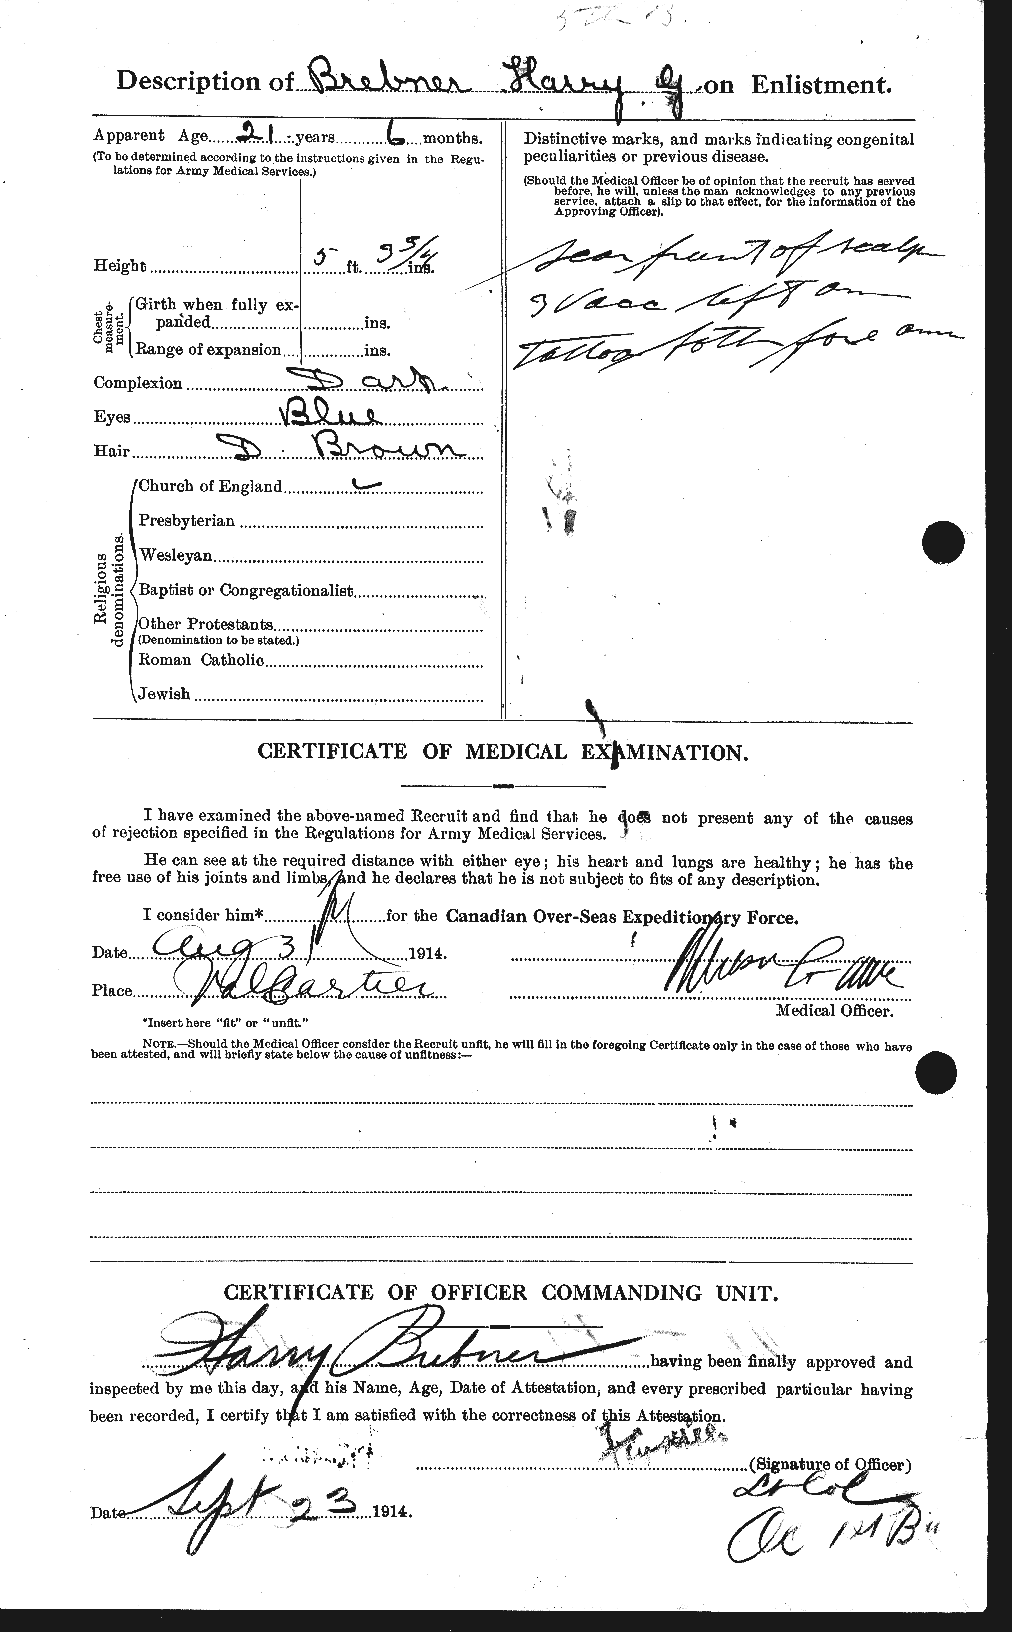 Personnel Records of the First World War - CEF 262843b